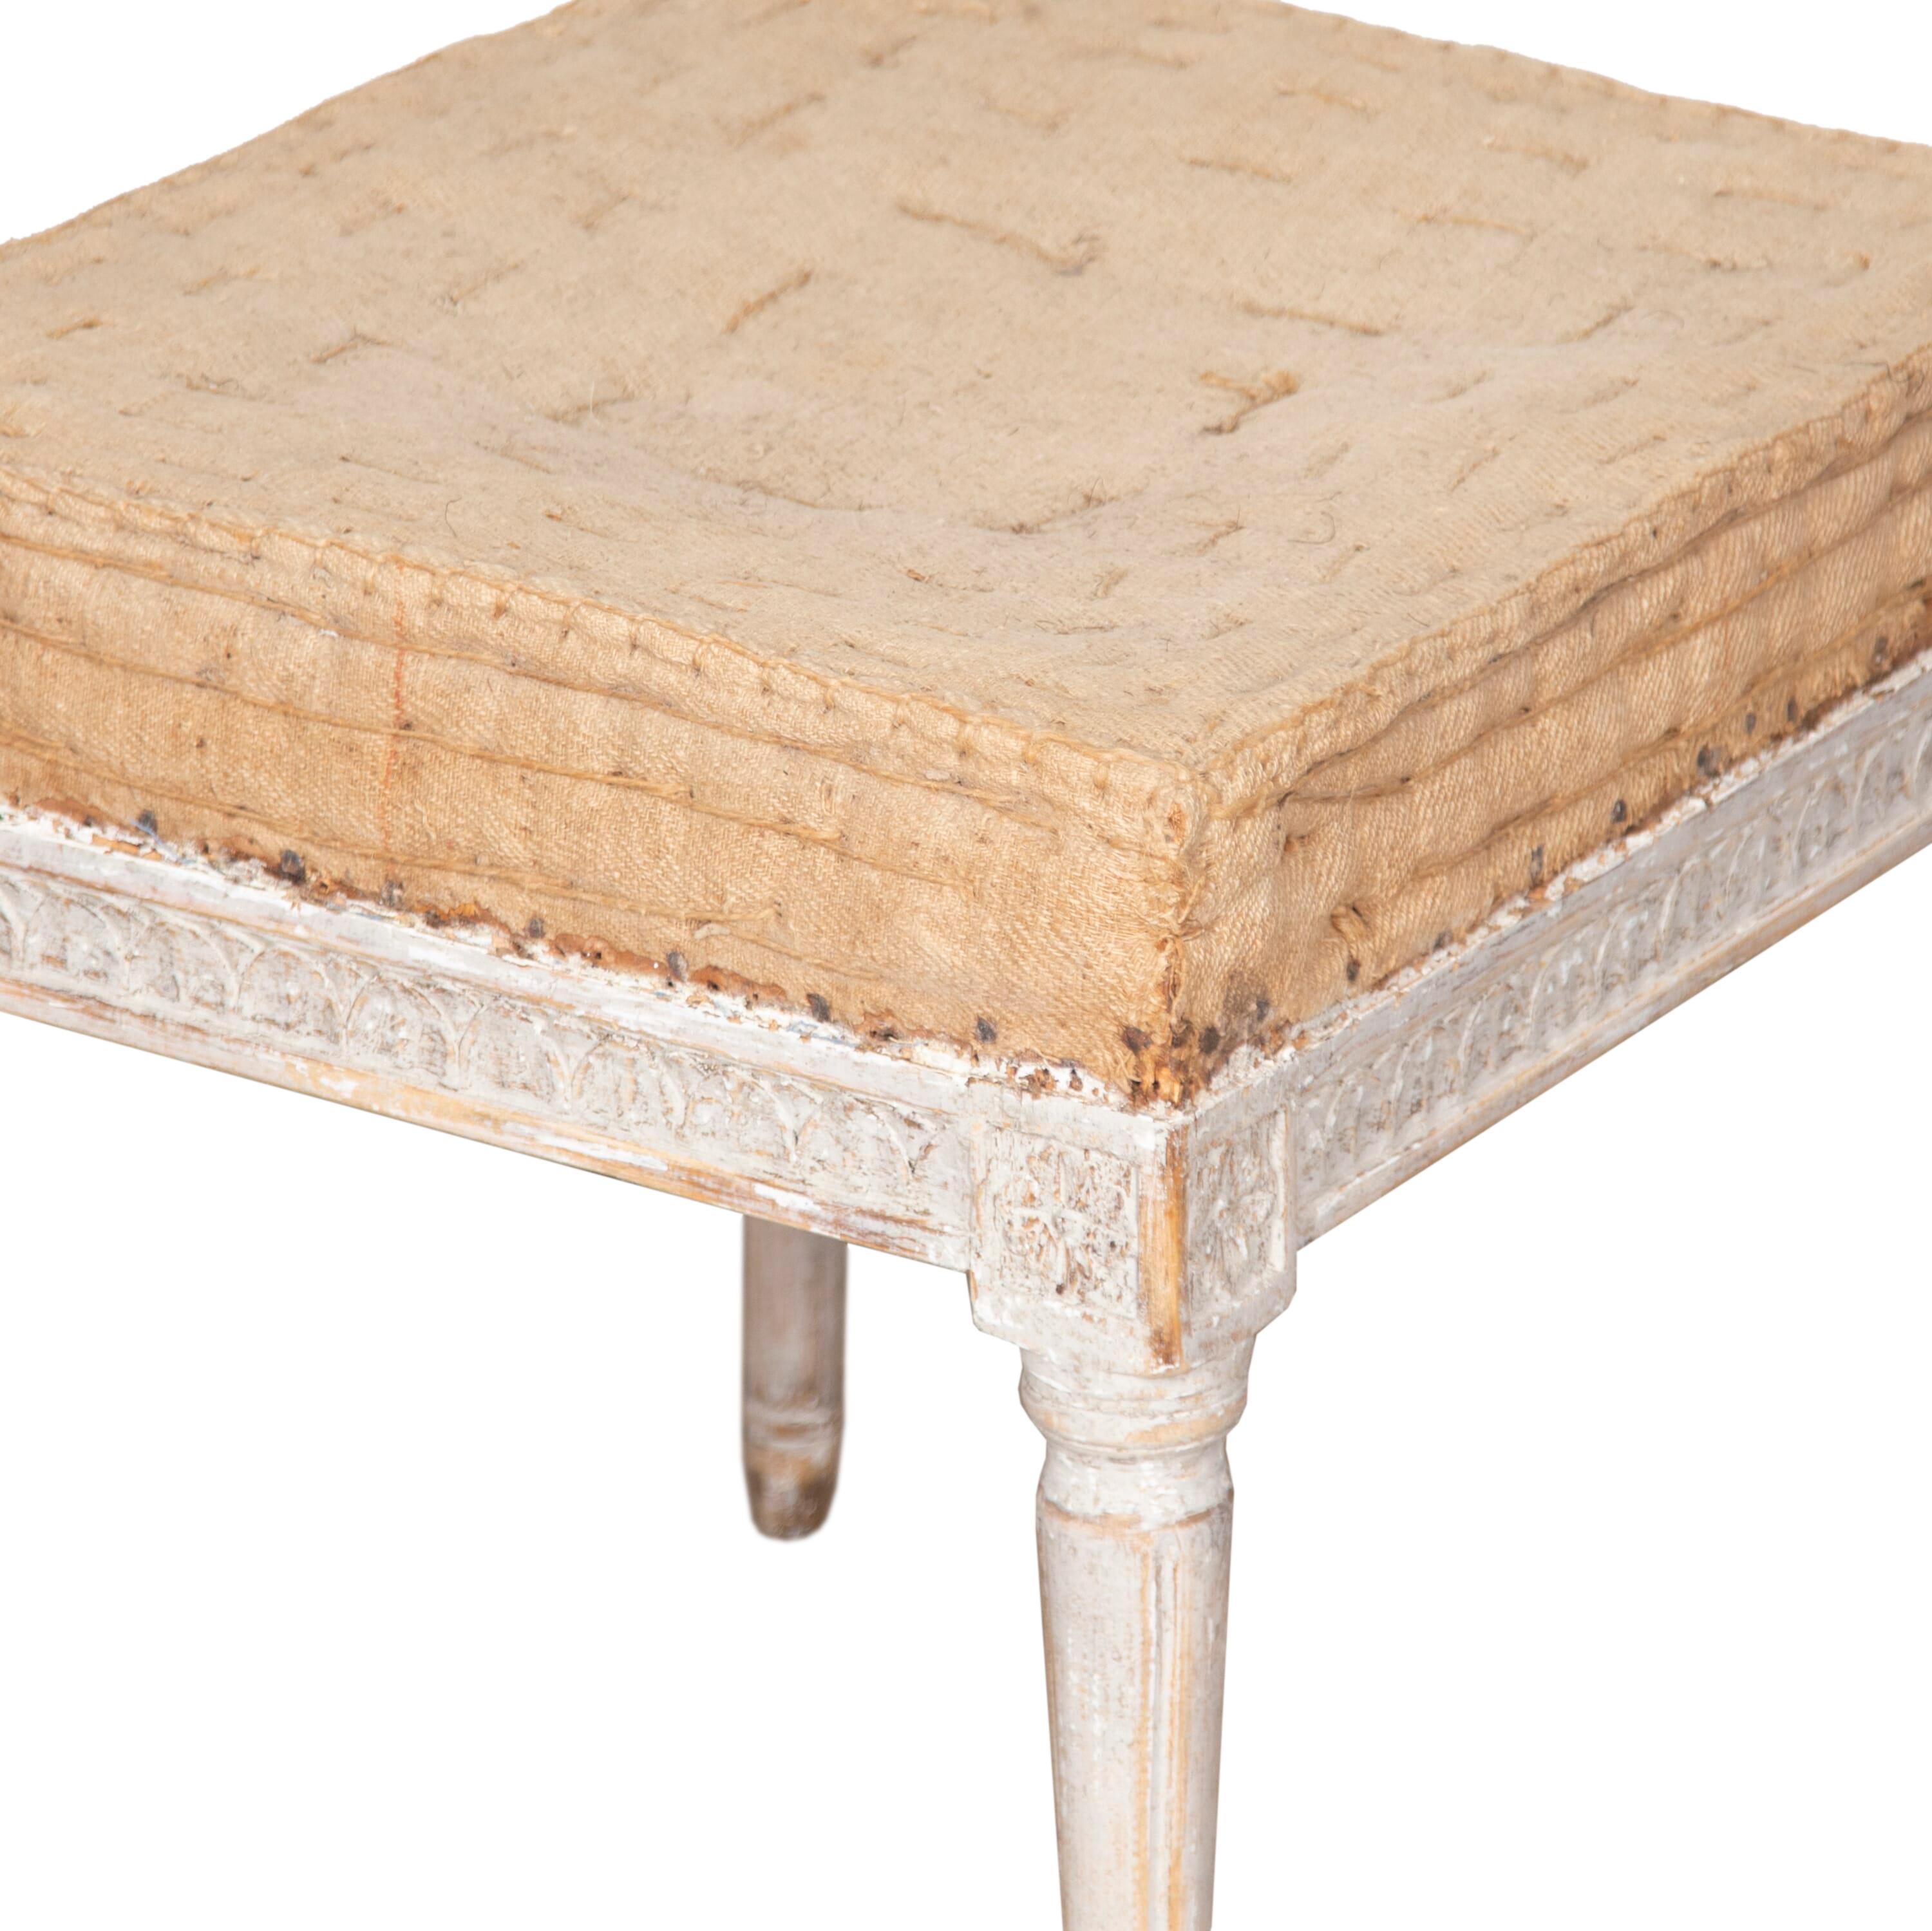 Period pair of 18th century Stockholm made pair of Gustavian footstools.
Repainted in soft grey with decorative carved detailing to the stretchers and legs. 
Circa 1780.